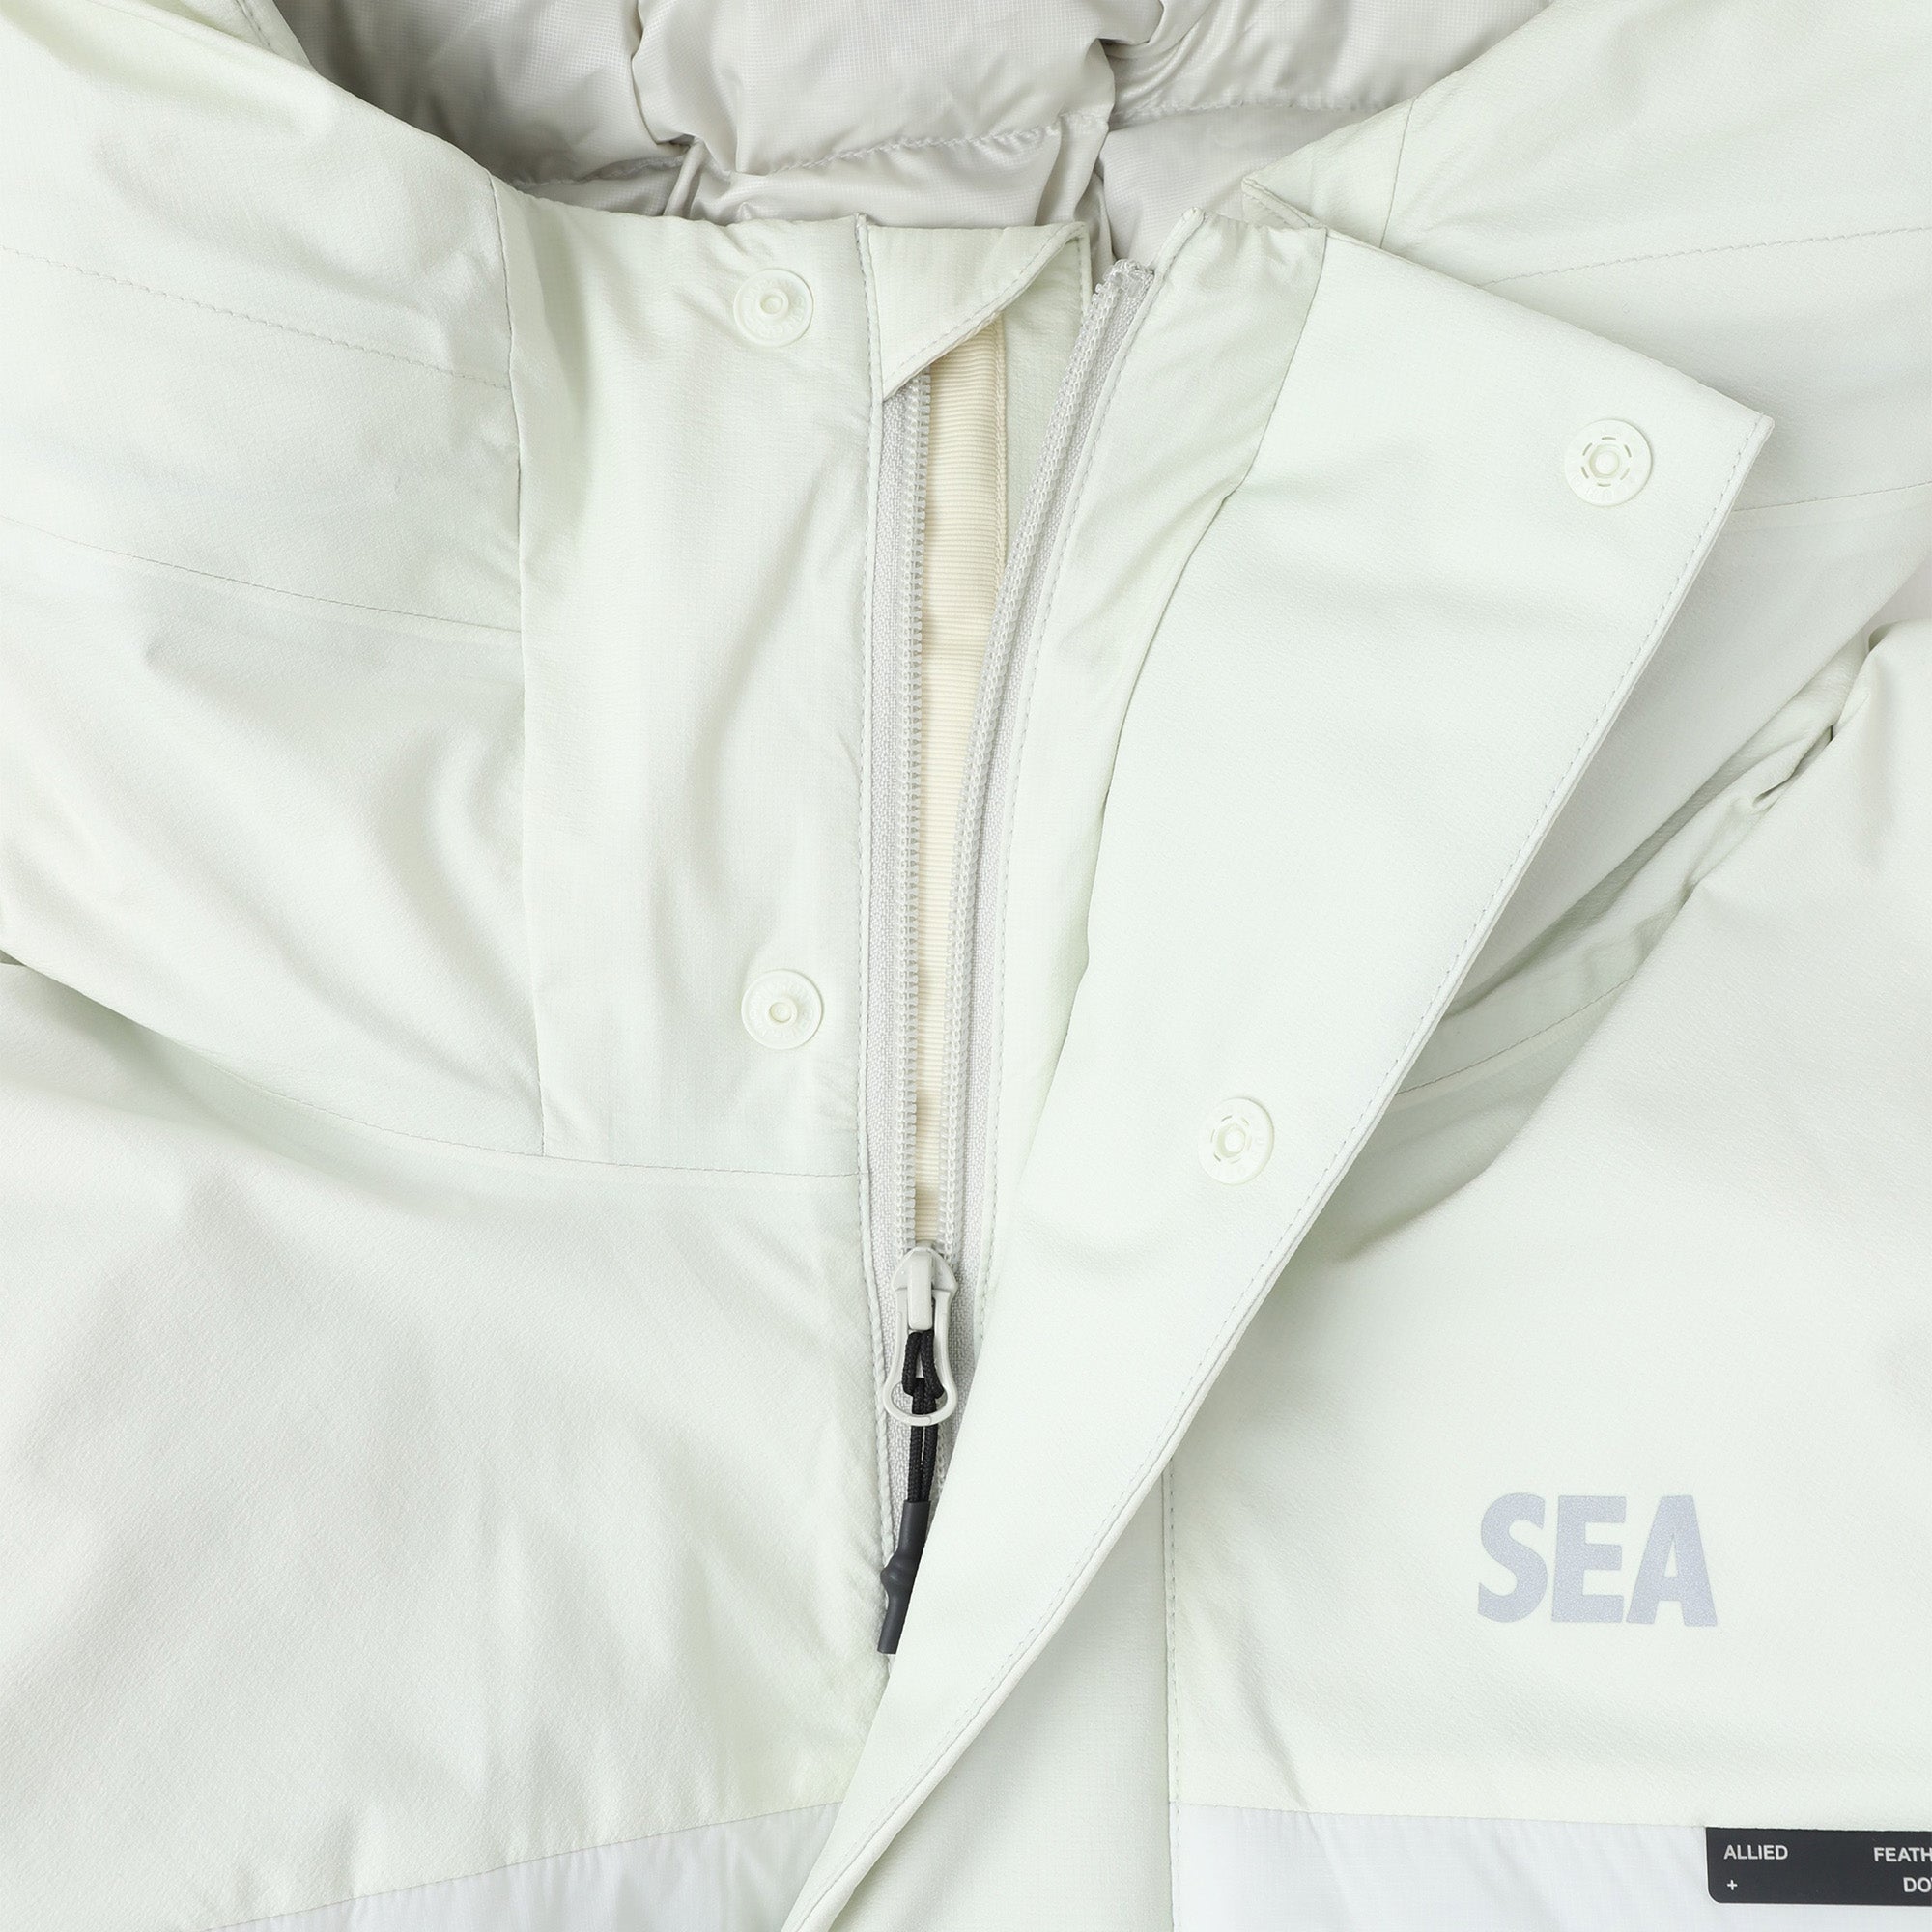 【WIND AND SEA collaboration】 SNOWFIELD BULKY DOWN JACKET